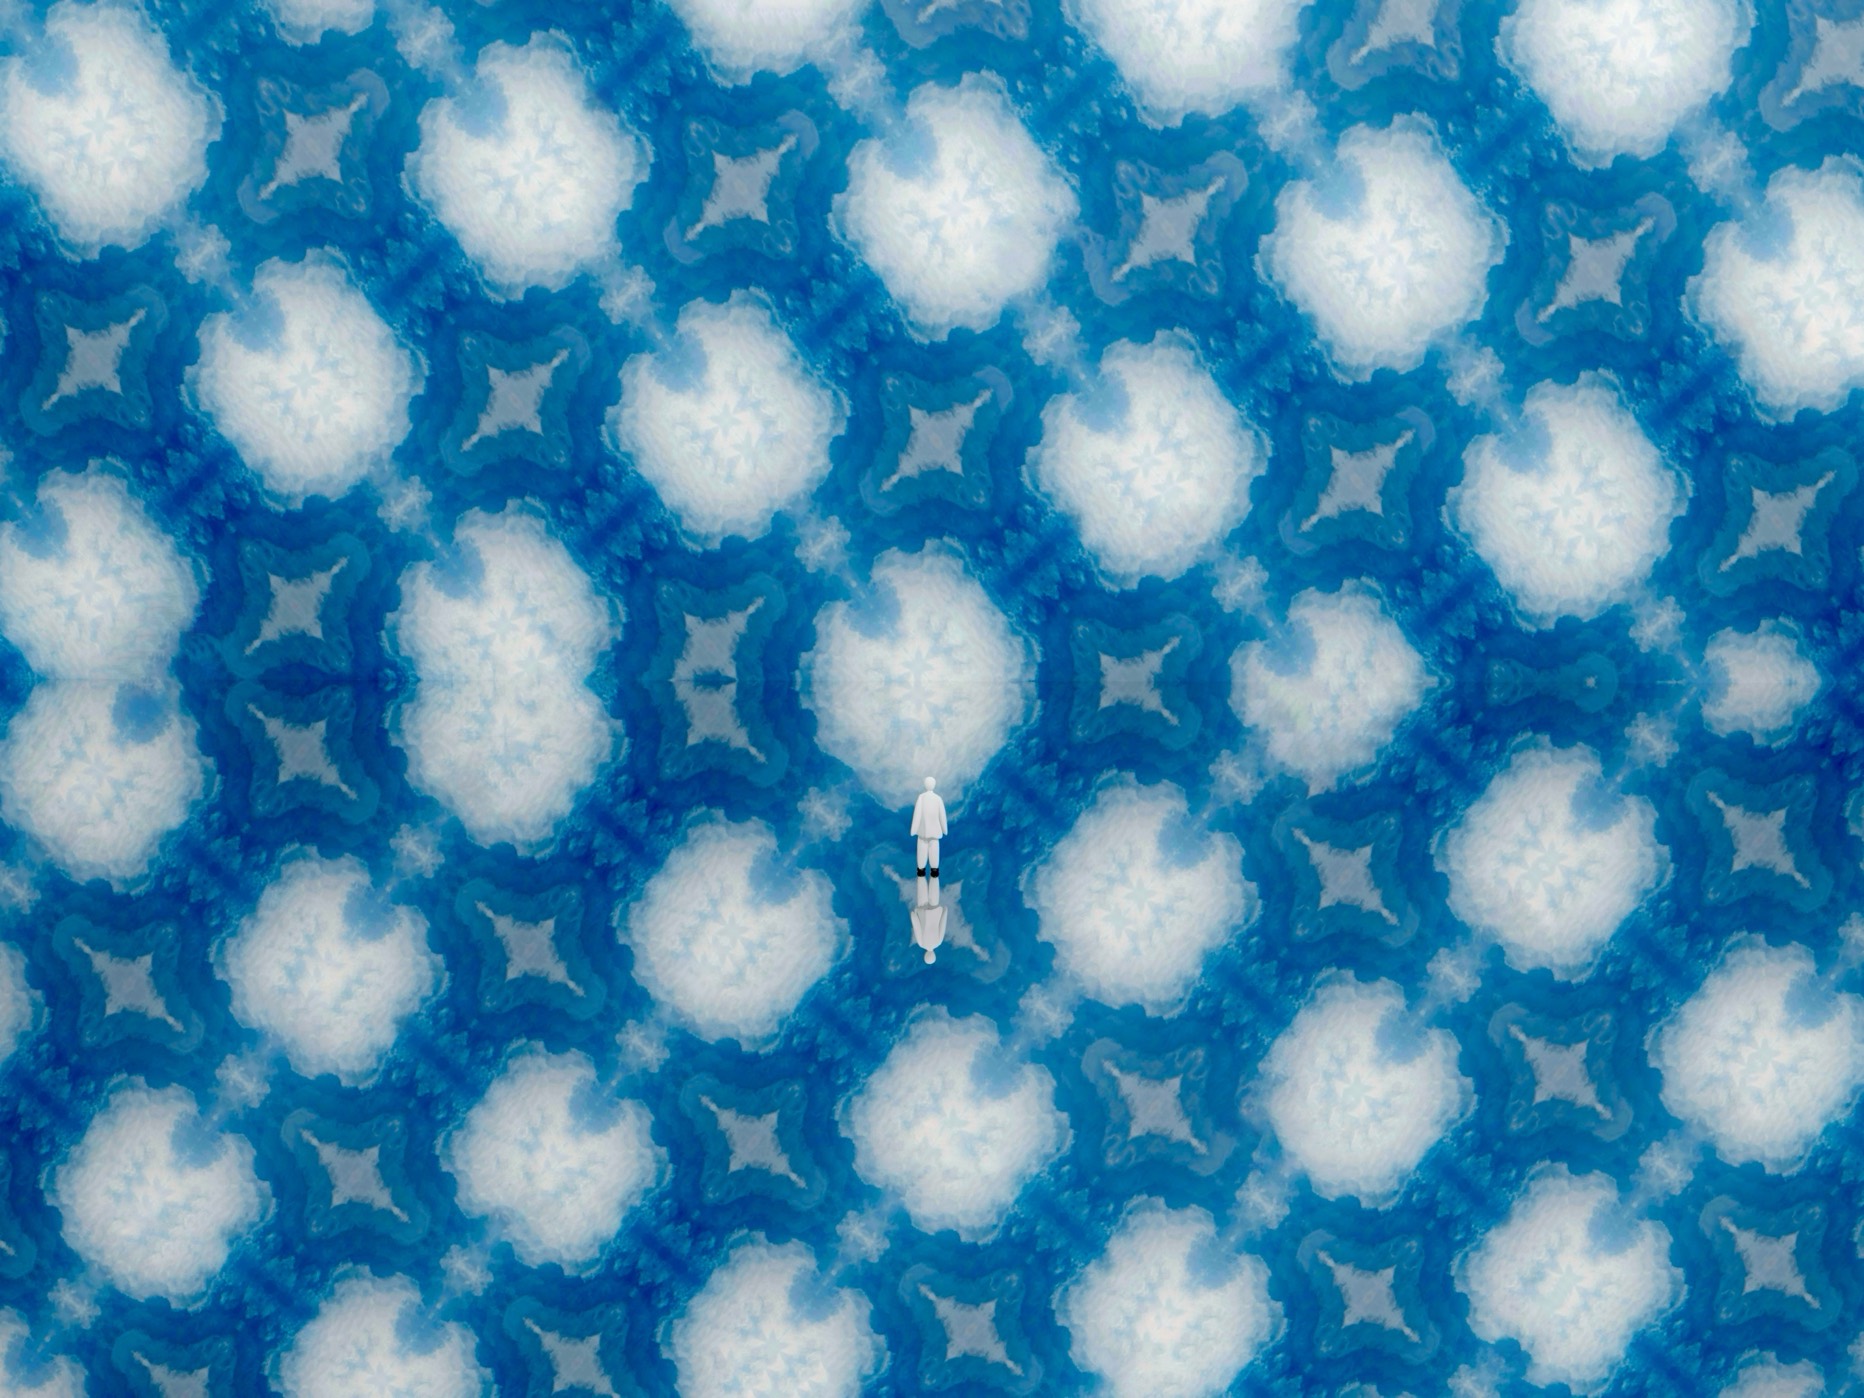 This is an image of Atsushigraph's graphic work Cloud Pocket. Pockets like cotton clouds are spread out on a blue background. The contrast of the white pocket against the blue sky-like background. Made in 2024.